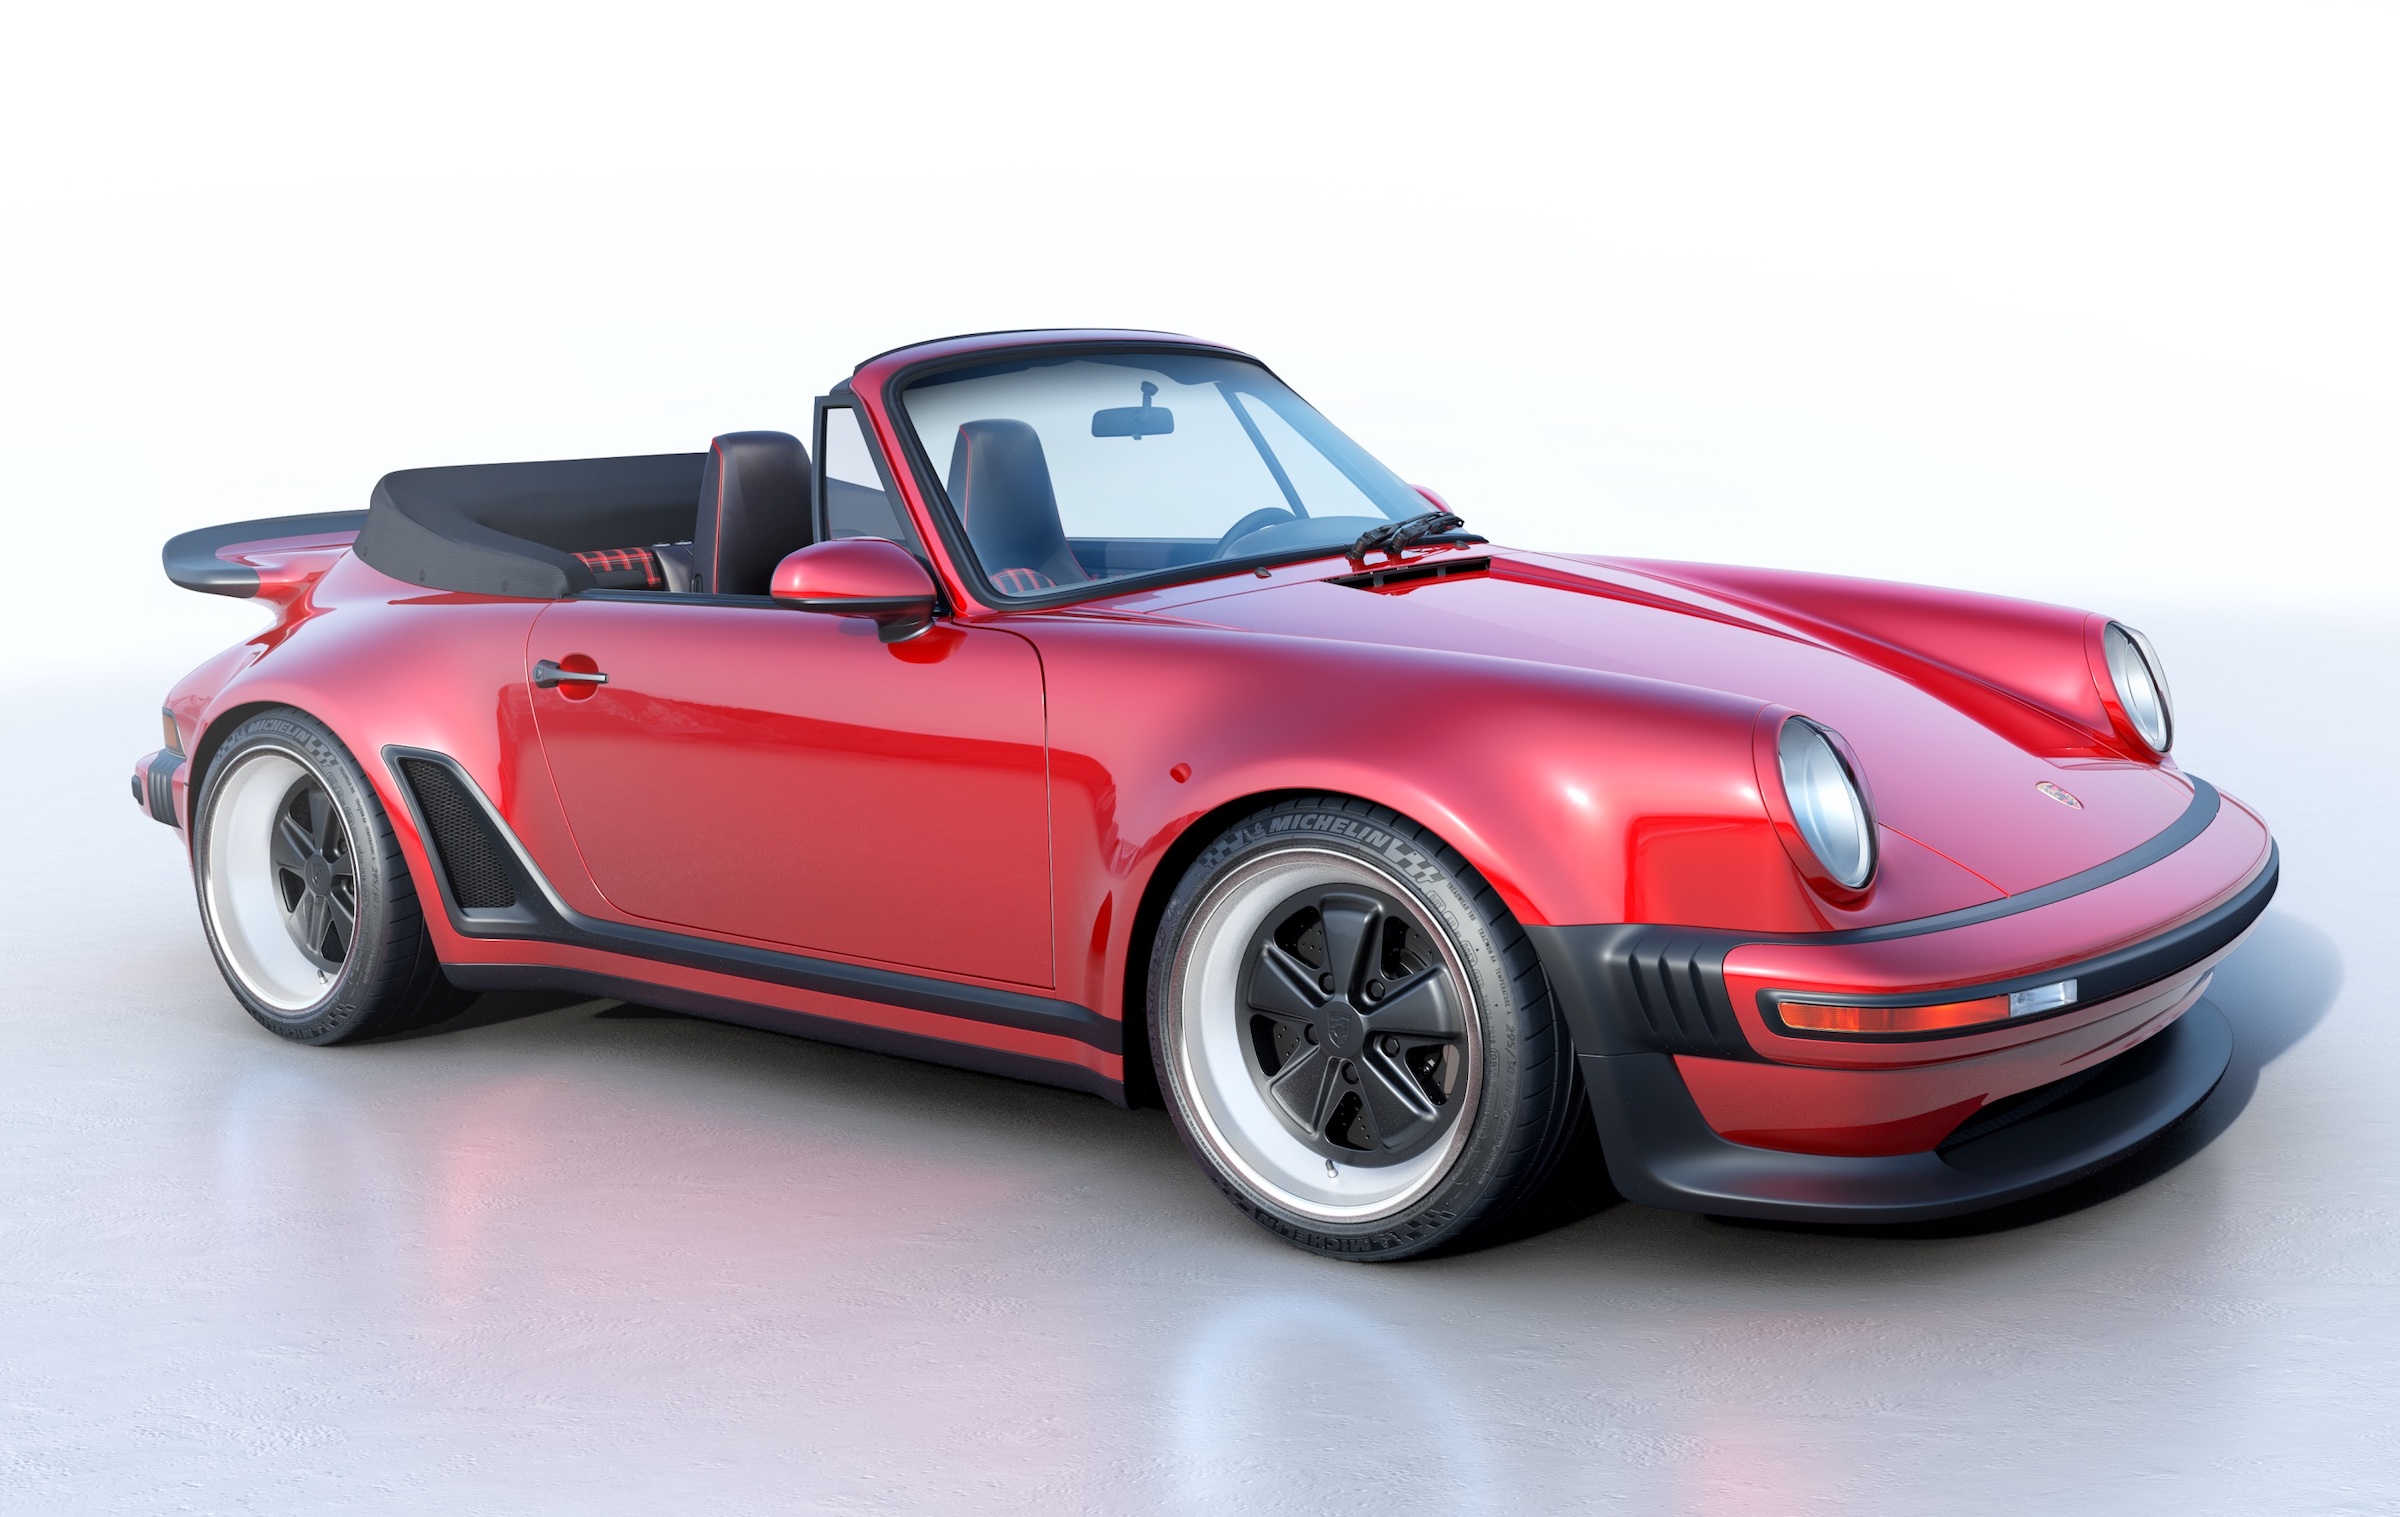 Turbo Study lifts the lid on Singer's first convertible